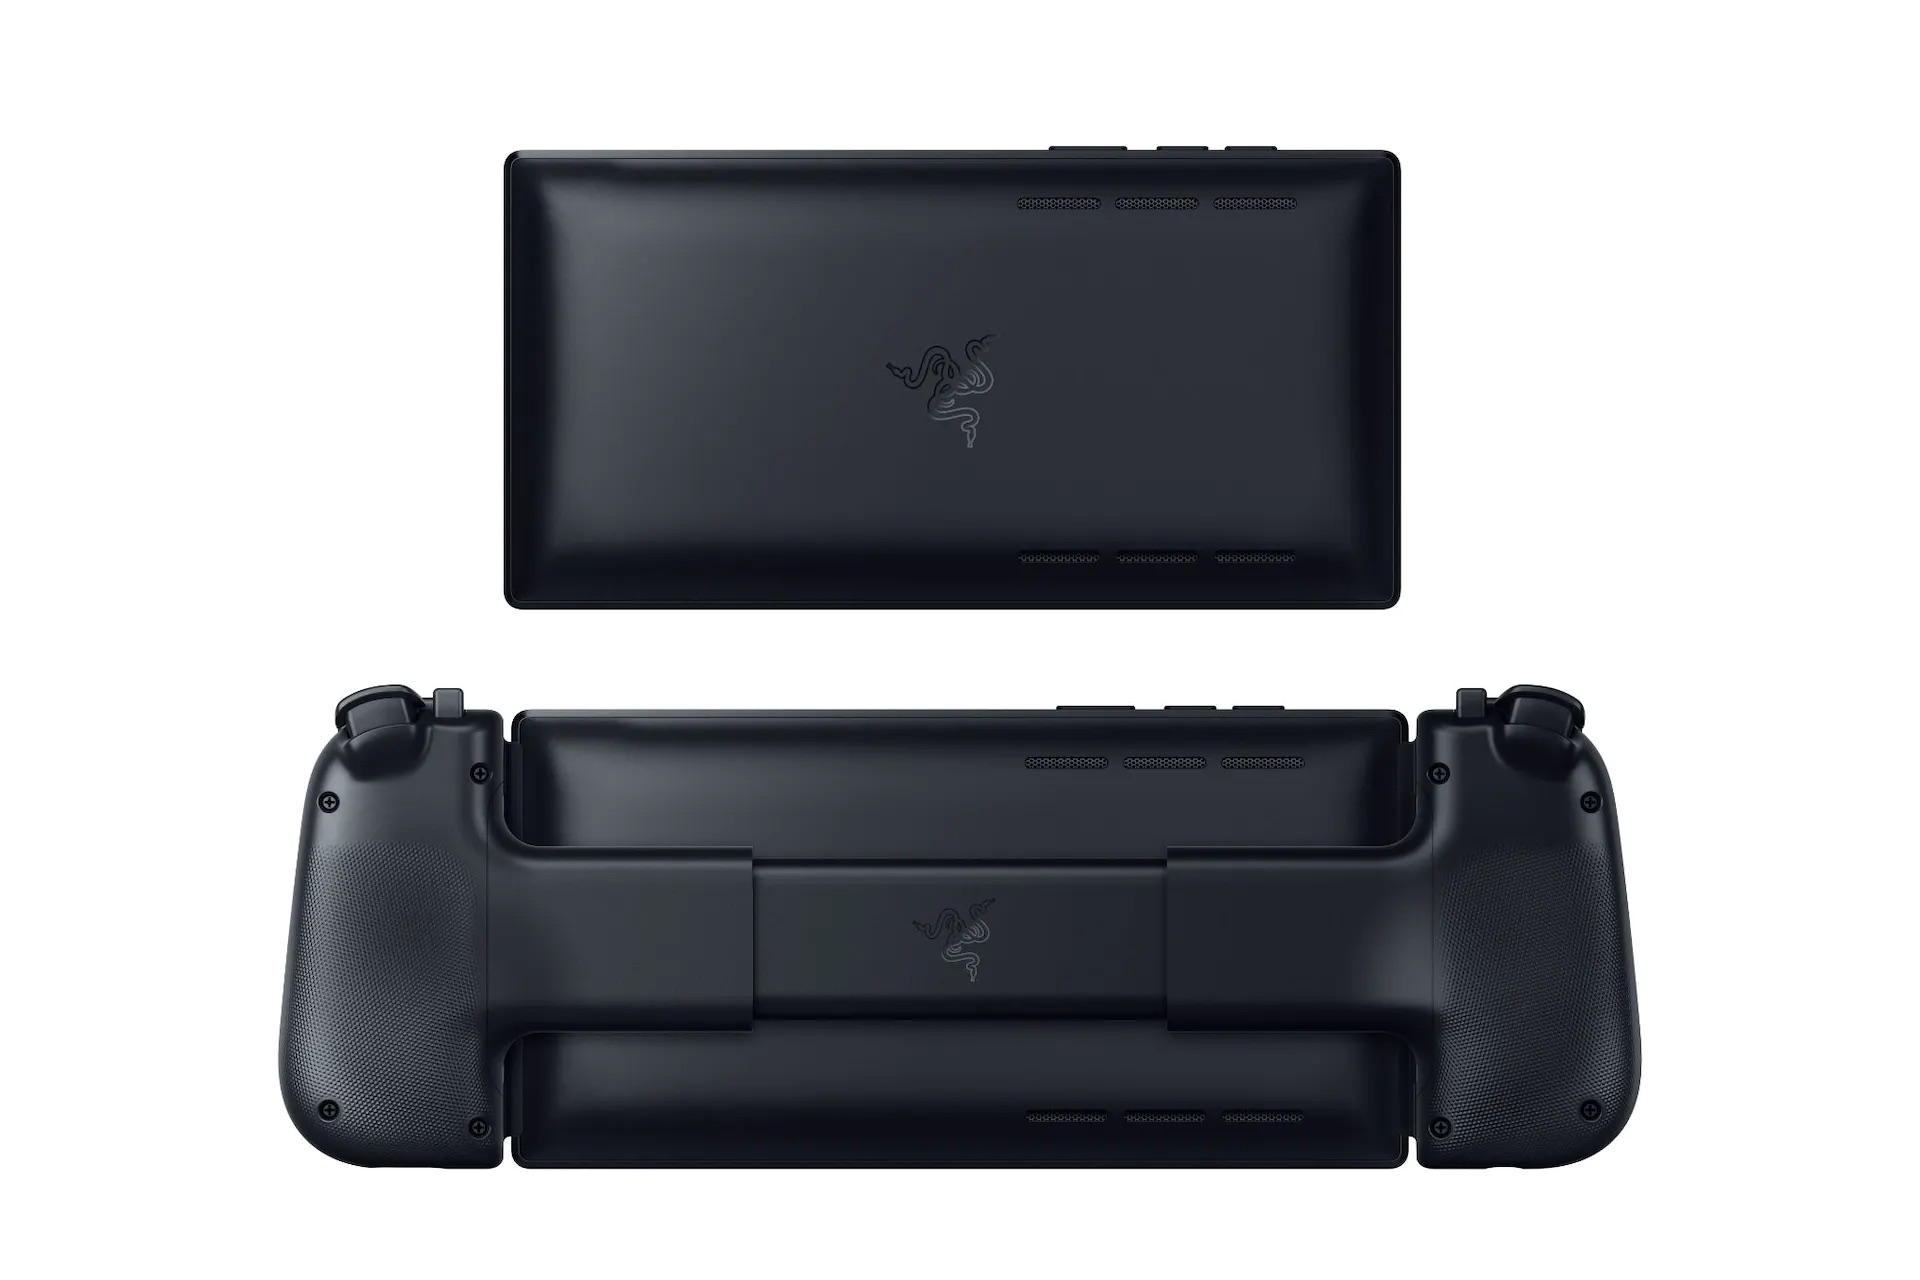 Razer Edge: a portable cloud gaming console on Android